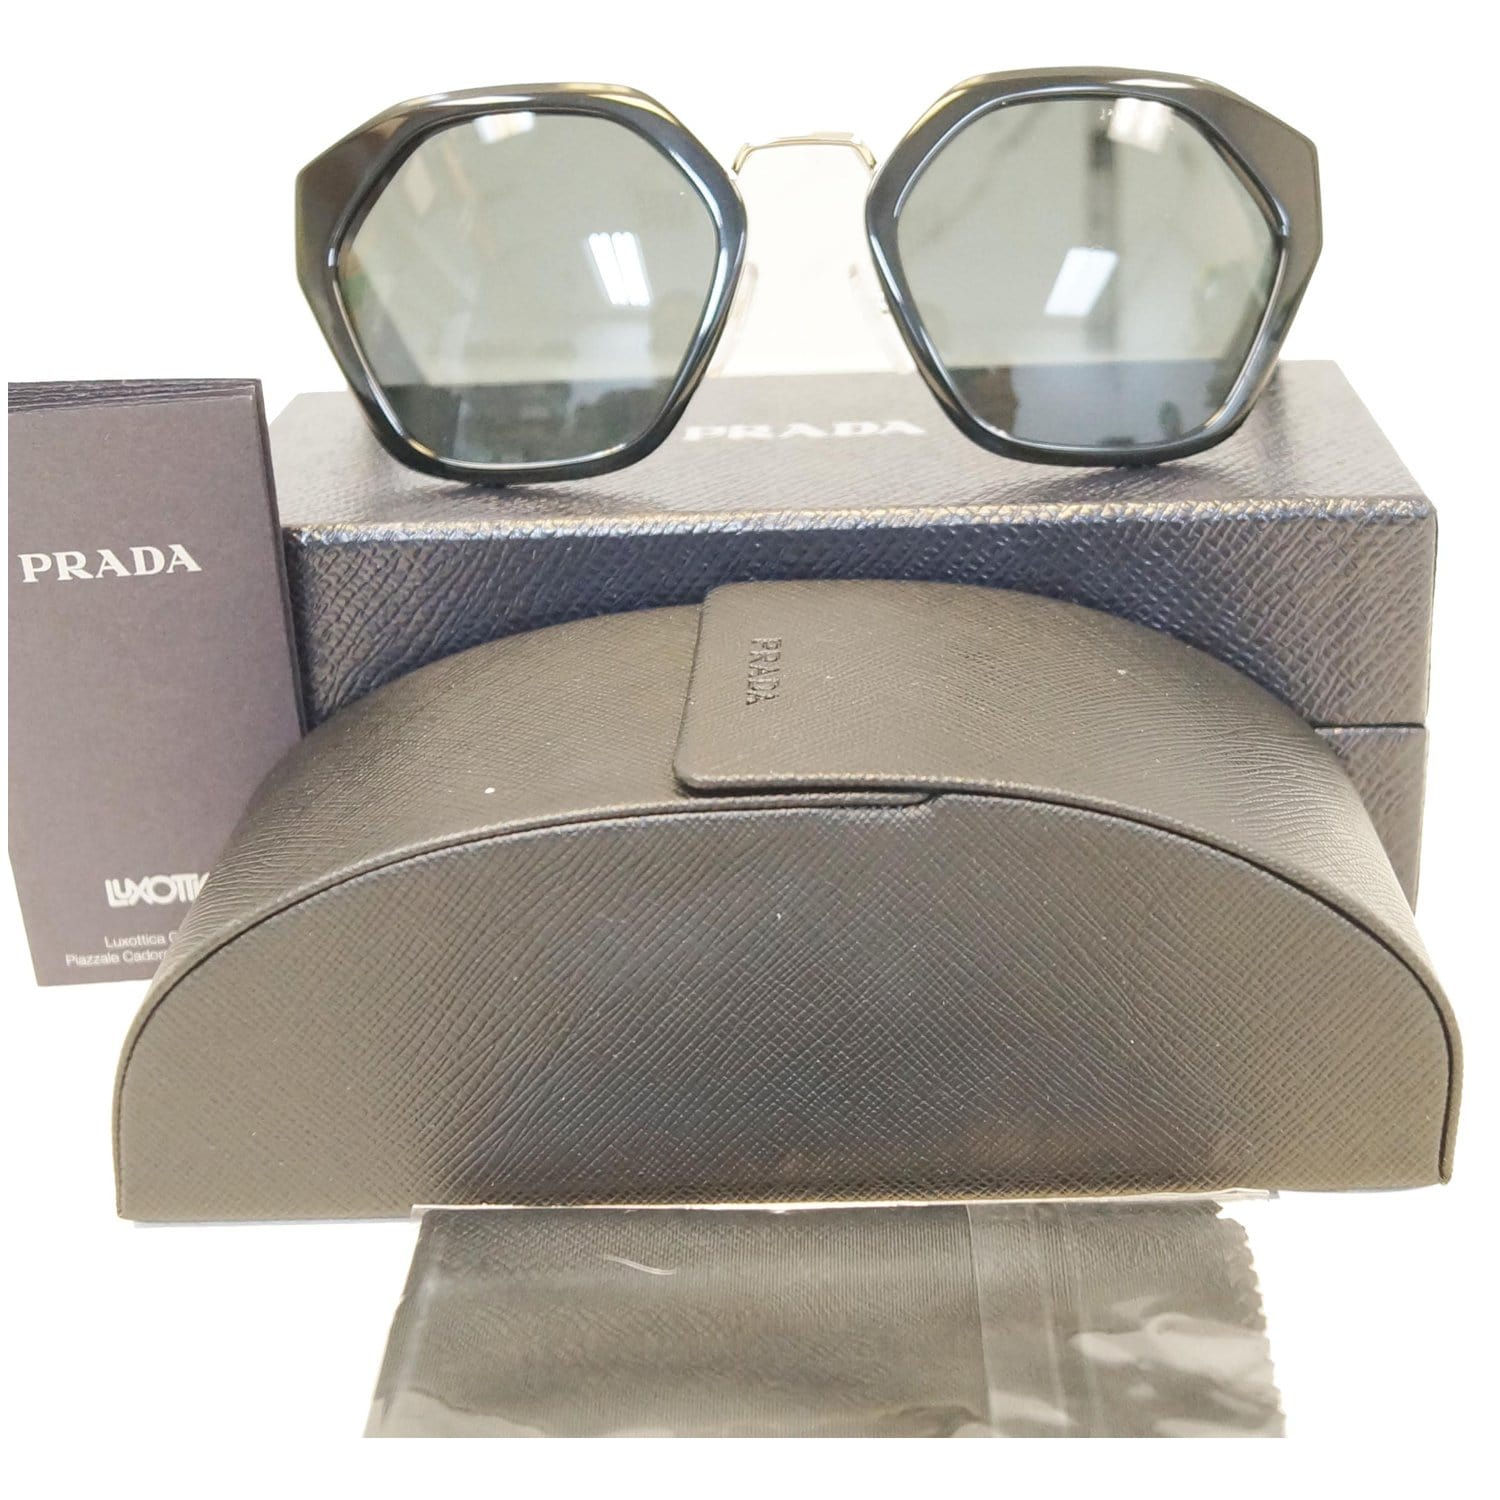 Prada Black Sunglasses for Women with its Case and Box